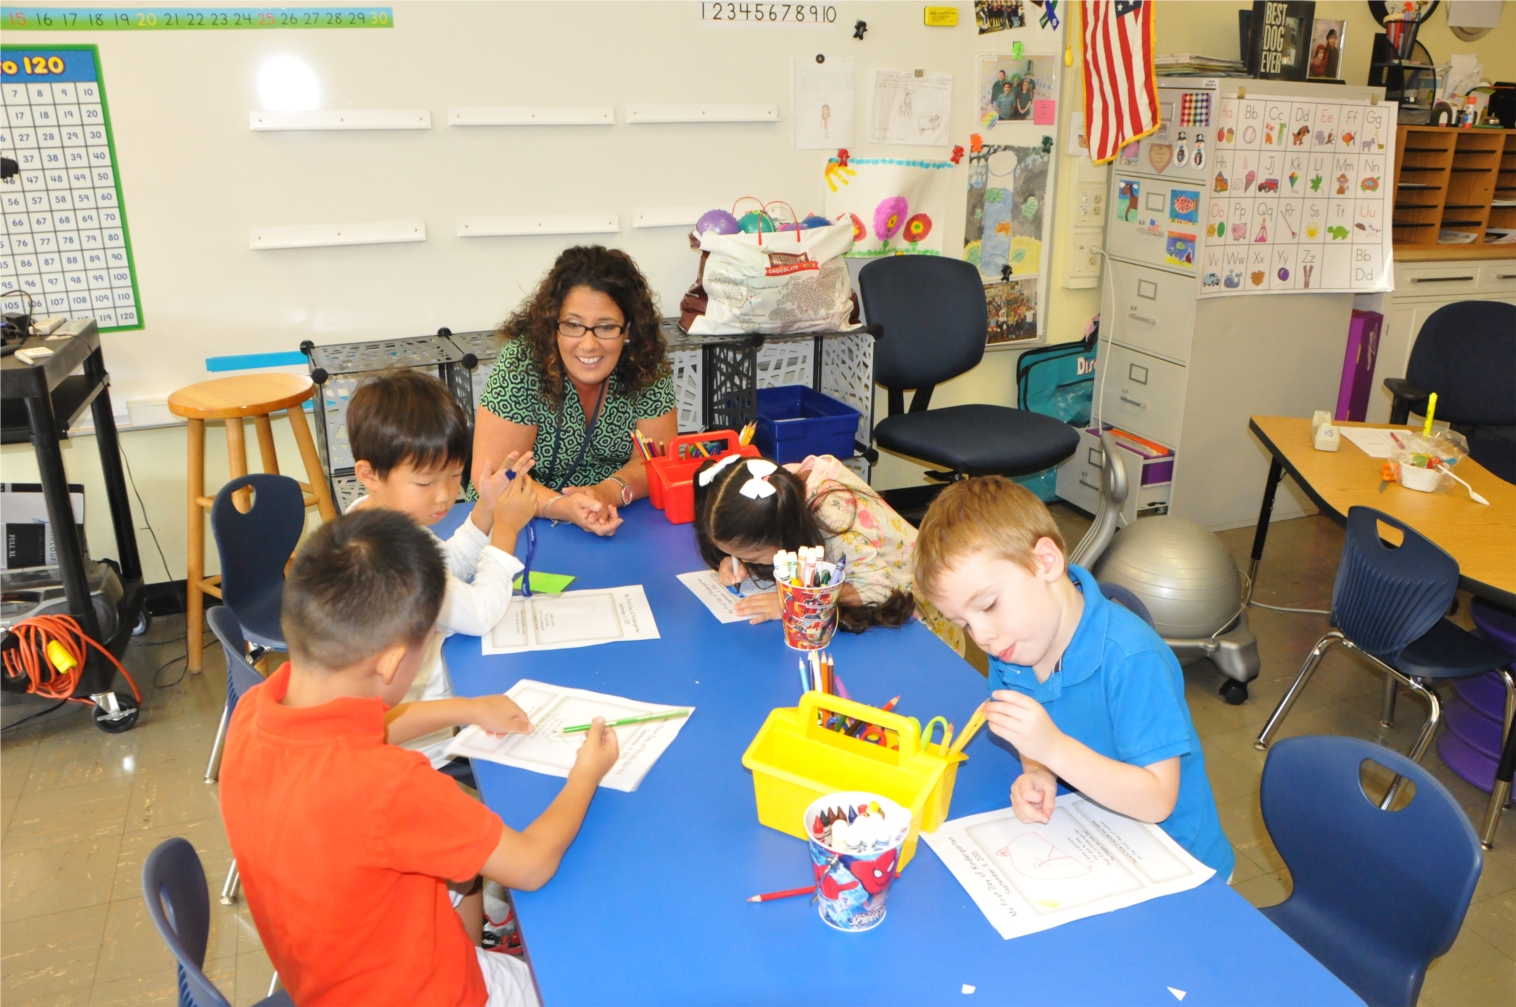 Assistant Superintendent Skeals works with students